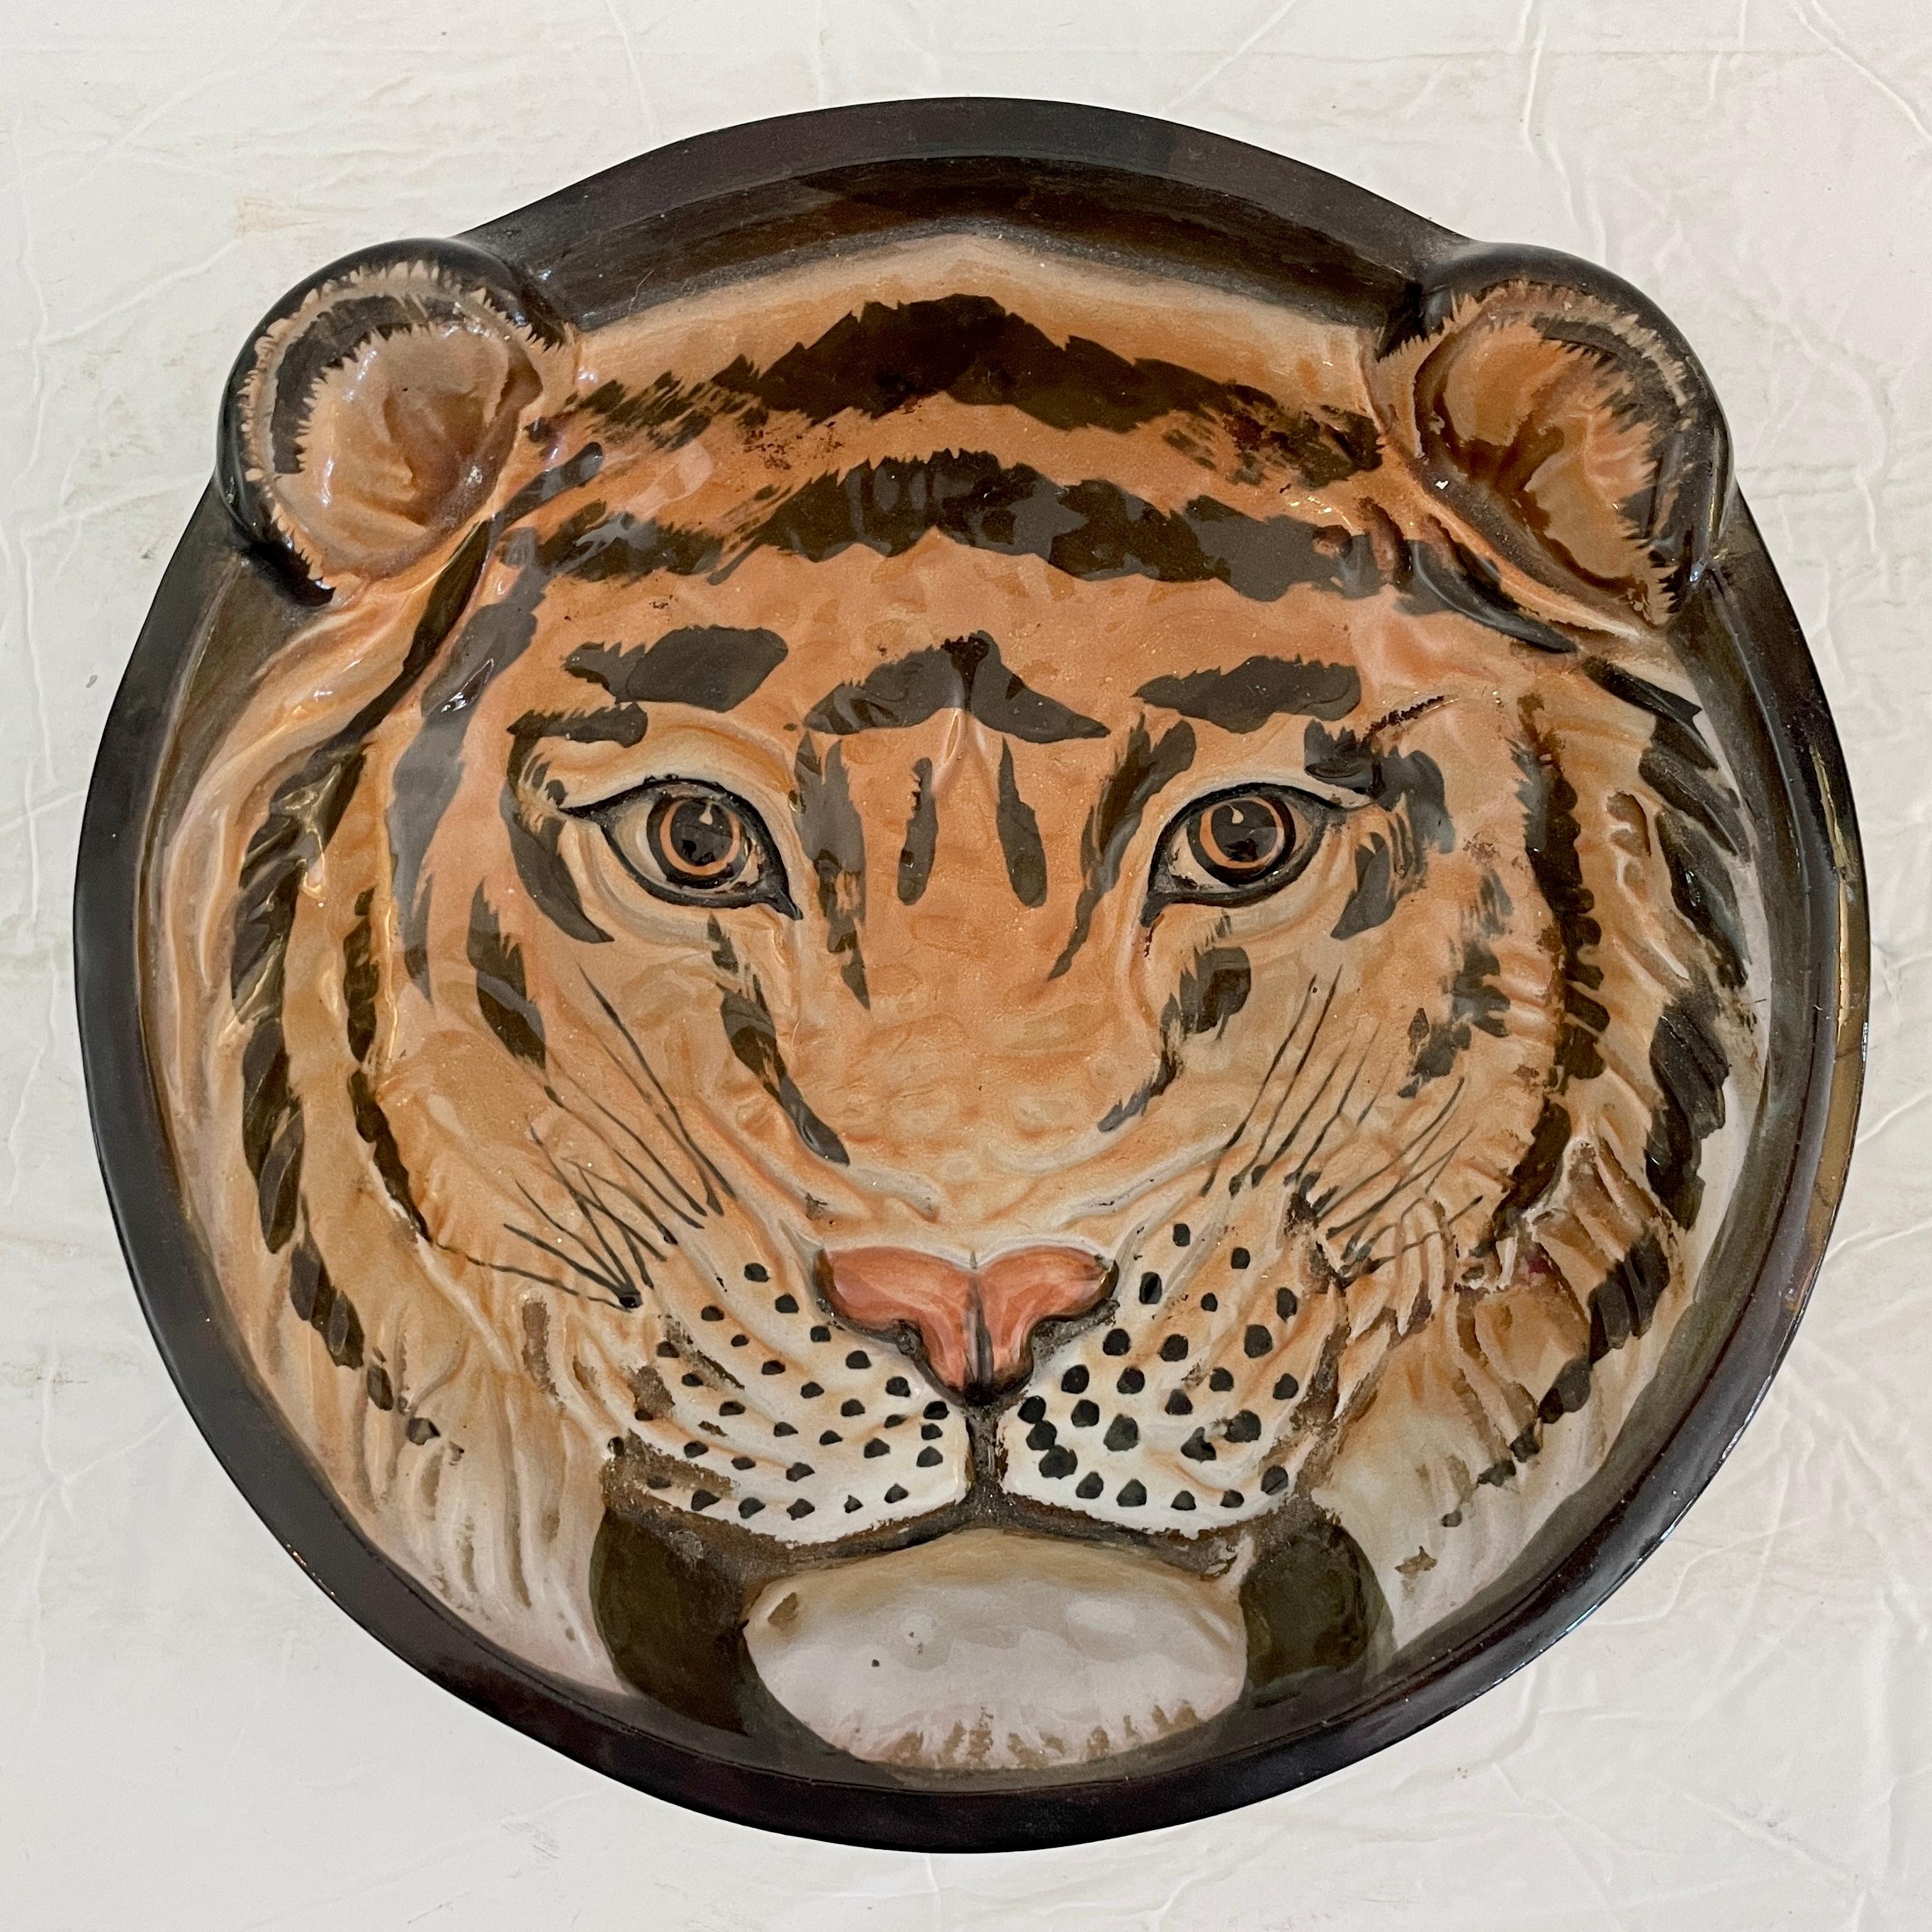 Fun ceramic Boho Chic serving bowl of a tiger face paint and motifs. Great addition to your bar and parties. This is part of a 4 series animal bowls, find them on our listings and collect them all!.